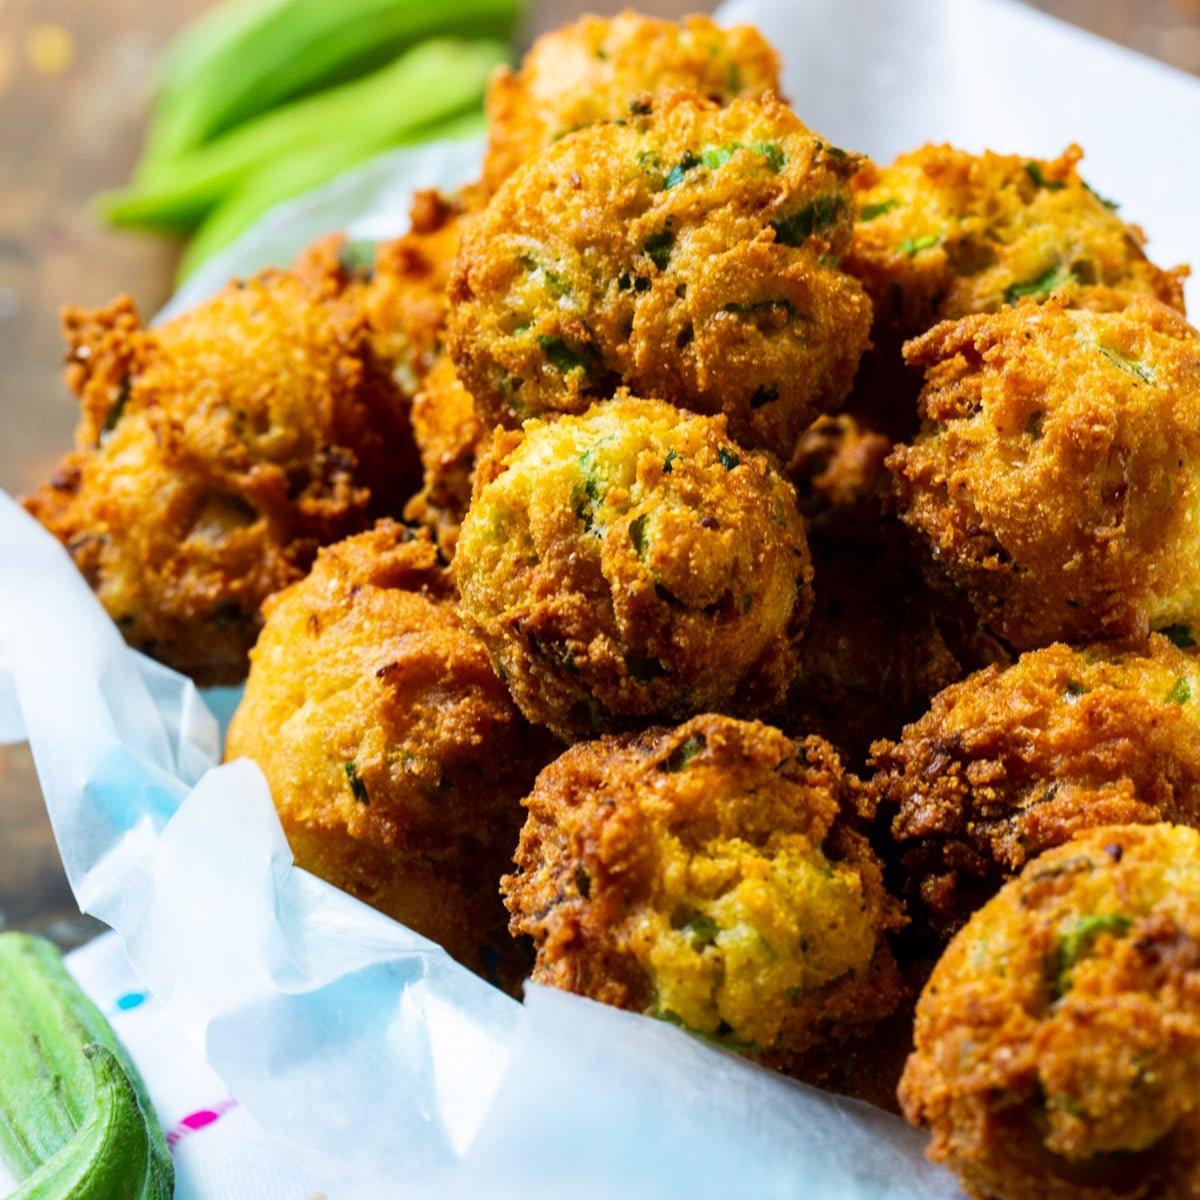 Okra Hush Puppies in a basket.